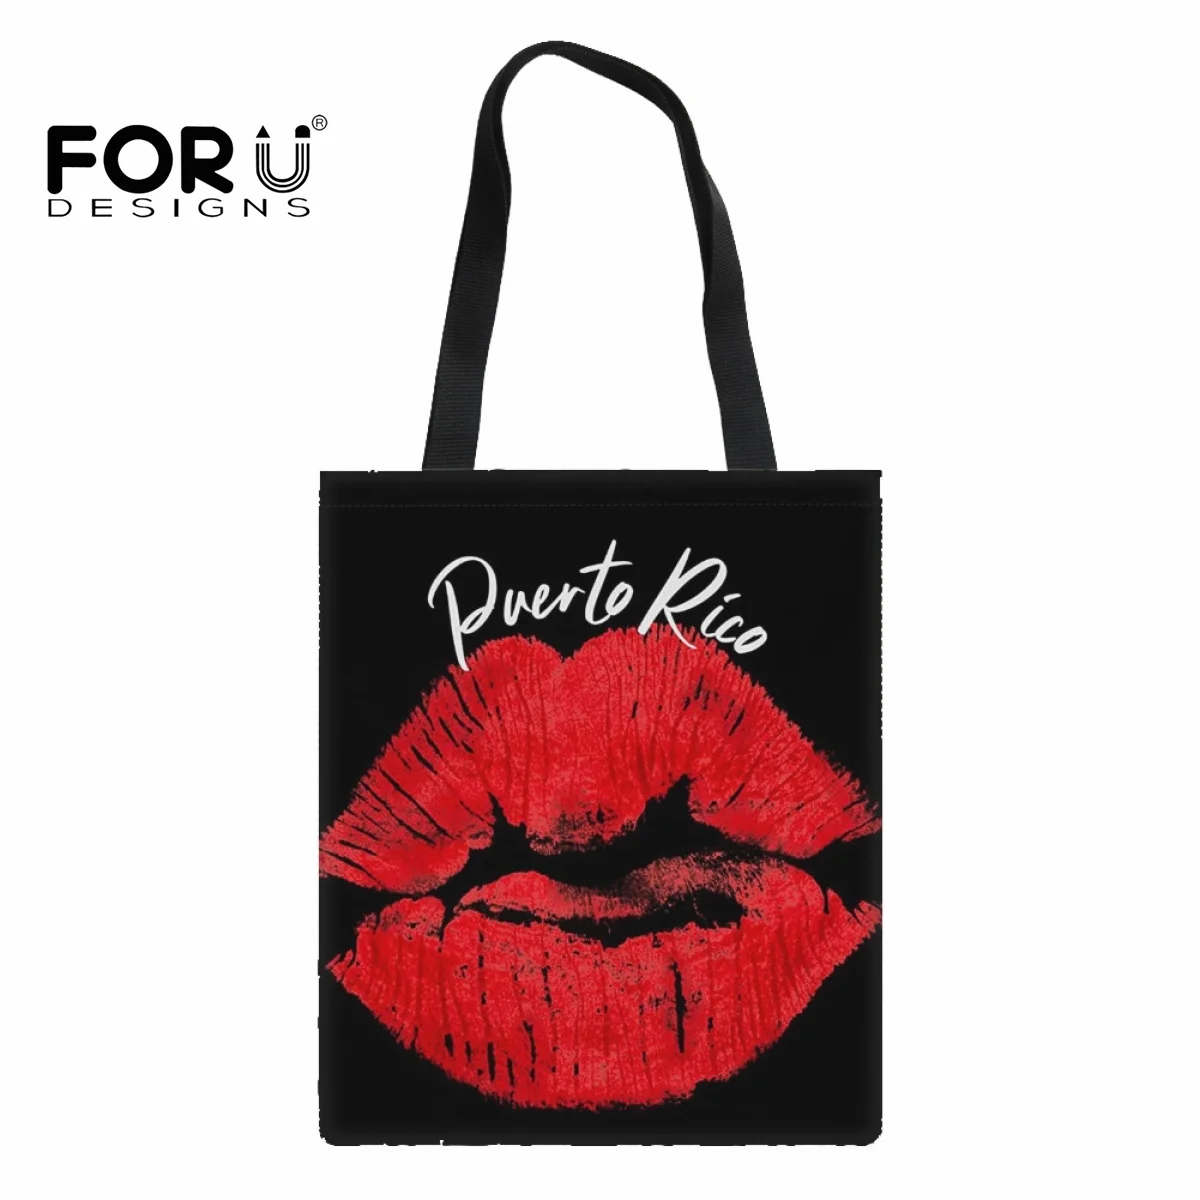 

FORUDESIGNS Fashion Handbags Casual Puerto Rican Red Lip Design Women's Totes Bag Eco-friendly Shopping Bag for Female Foldable